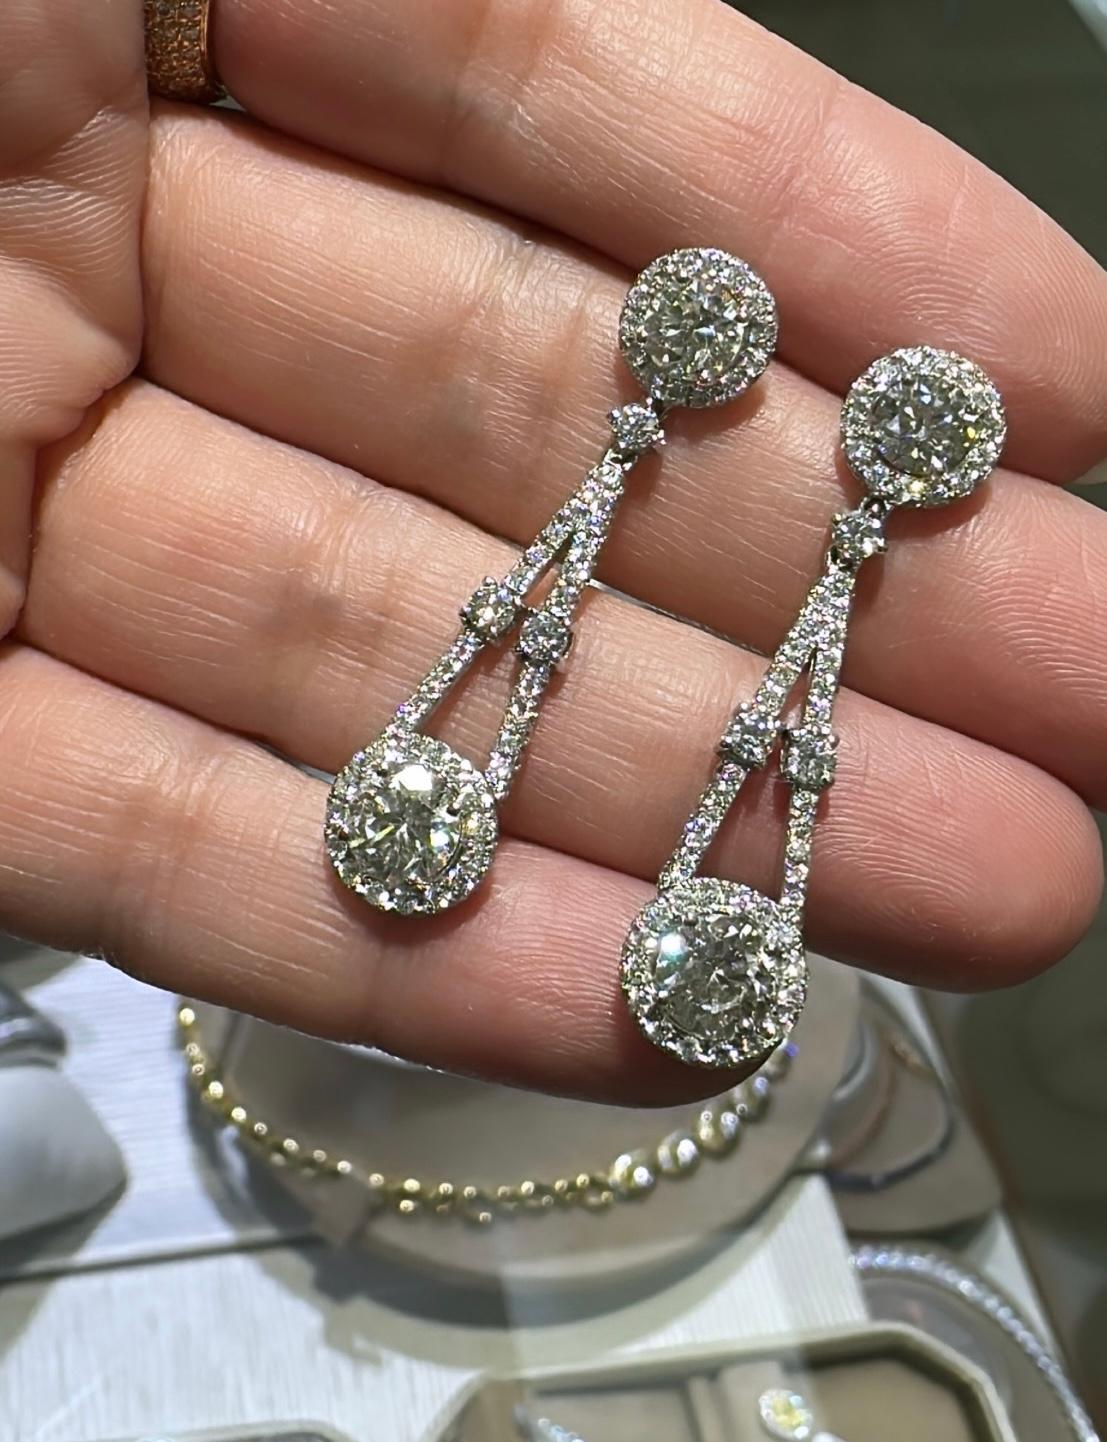 Love art-deco inspired jewelry earrings? Then these gorgeous 5.24ctw diamond earrings are a must-have for your jewelry box. They are beautifully faceted and will glimmer with every move that you make.
Metal: 18K White Gold
Diamond Shape: Round